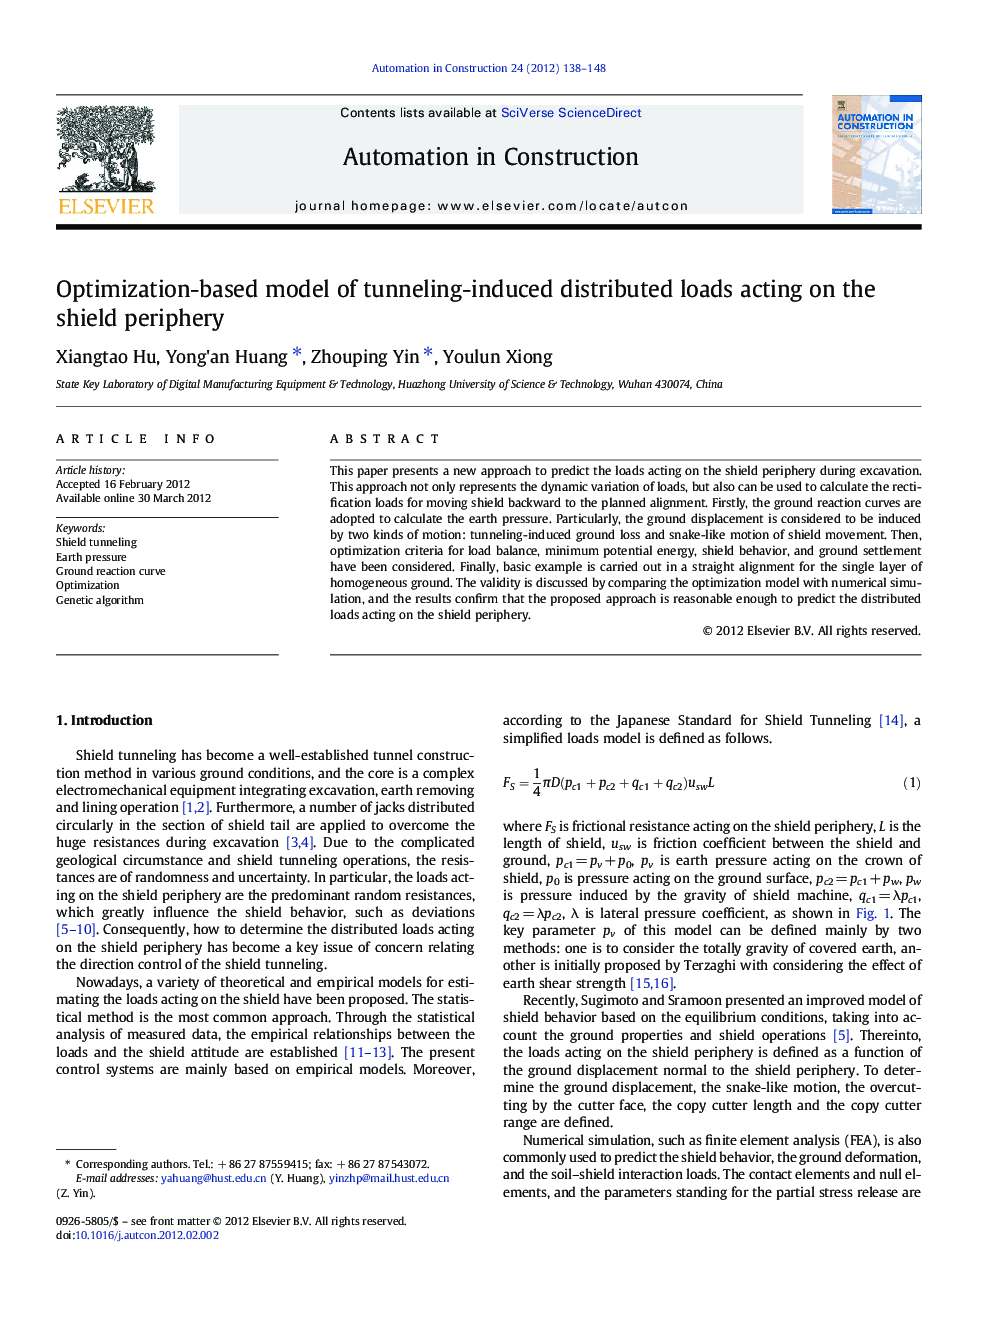 Optimization-based model of tunneling-induced distributed loads acting on the shield periphery